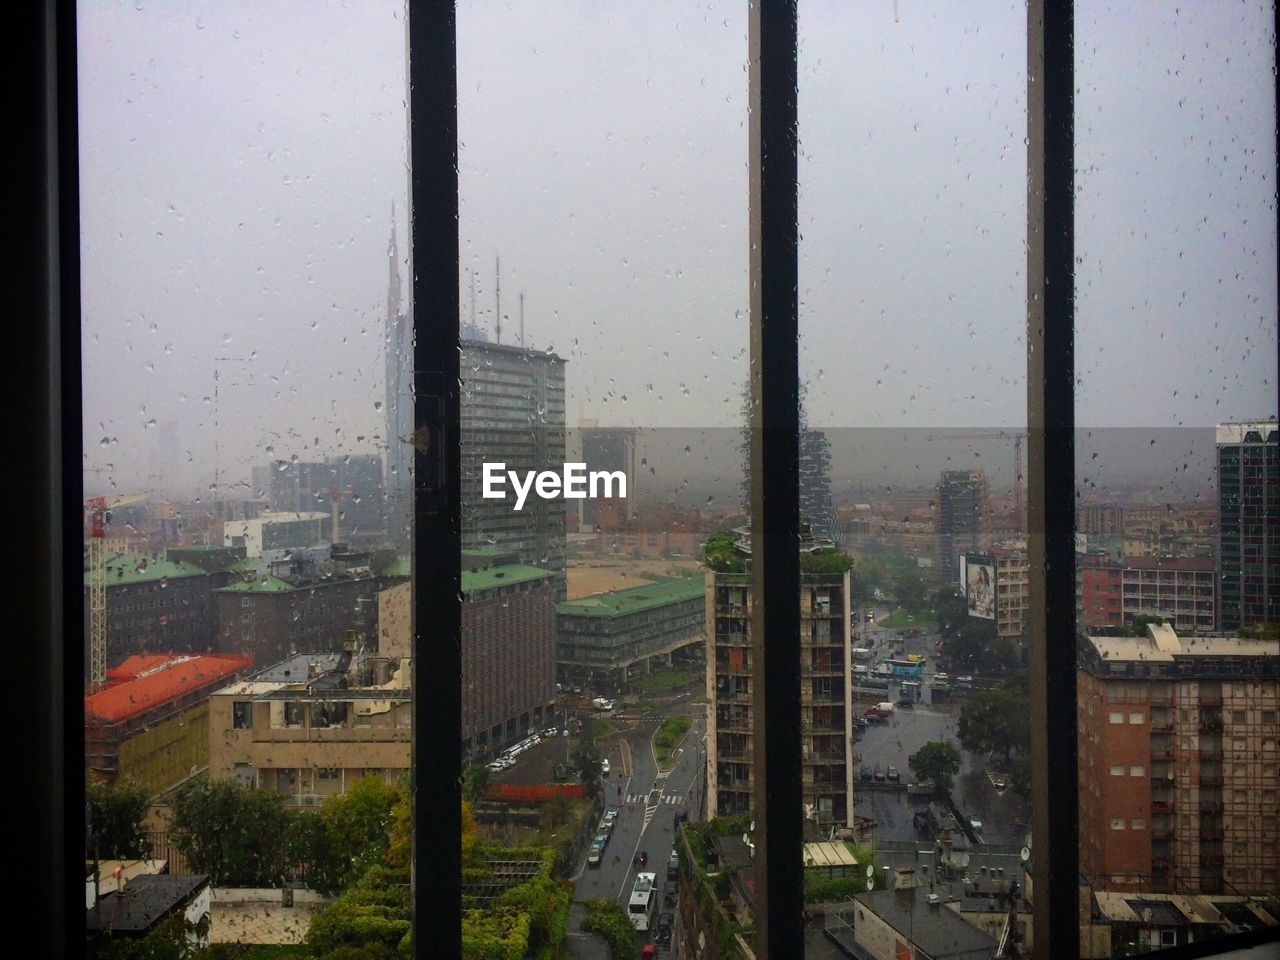 VIEW OF CITYSCAPE THROUGH WINDOW